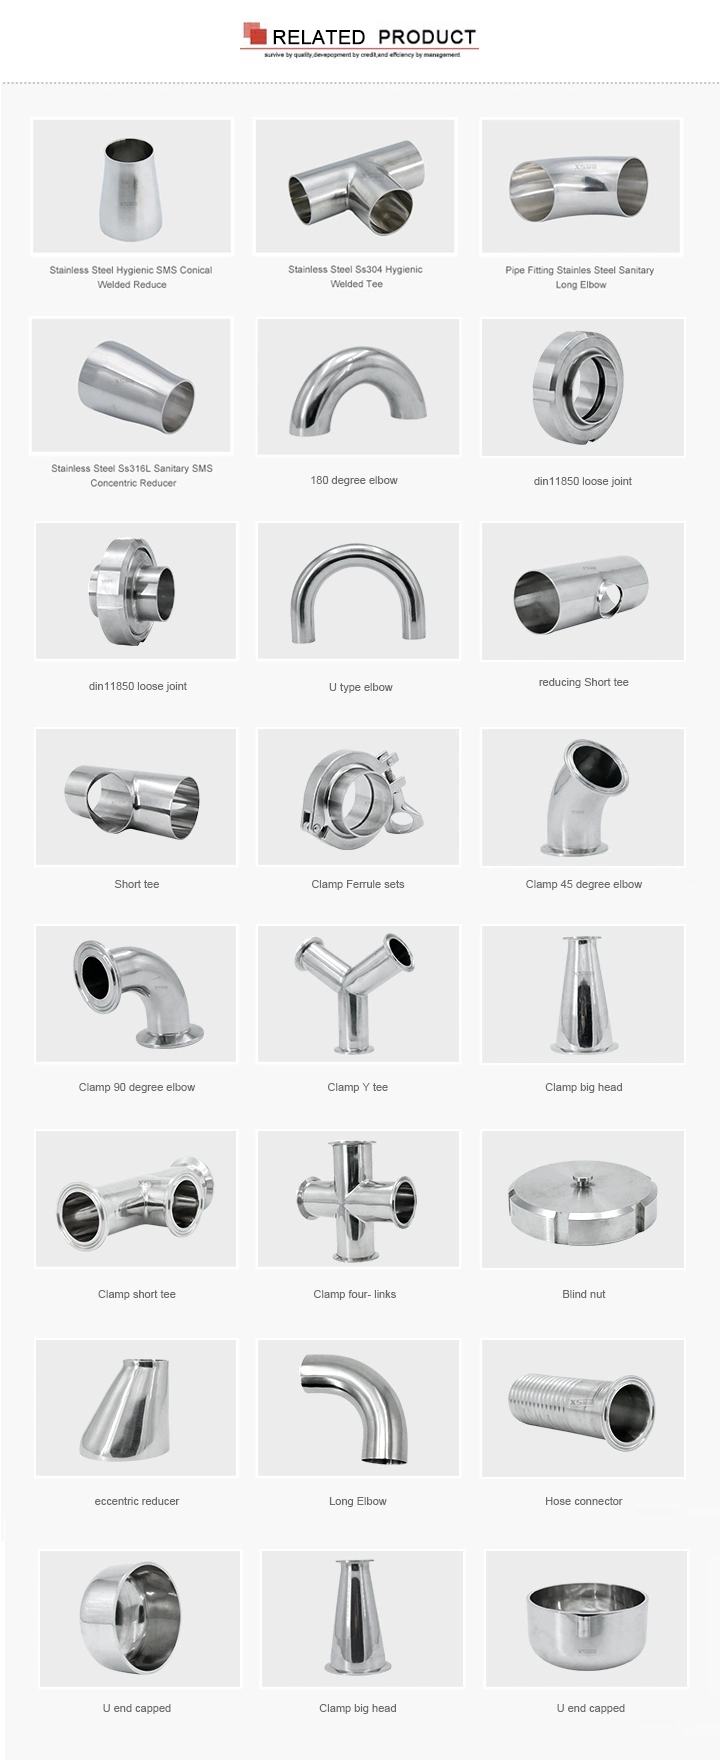 SS304 Pipe Fitting Sanitary Tri Clamping Ferrule